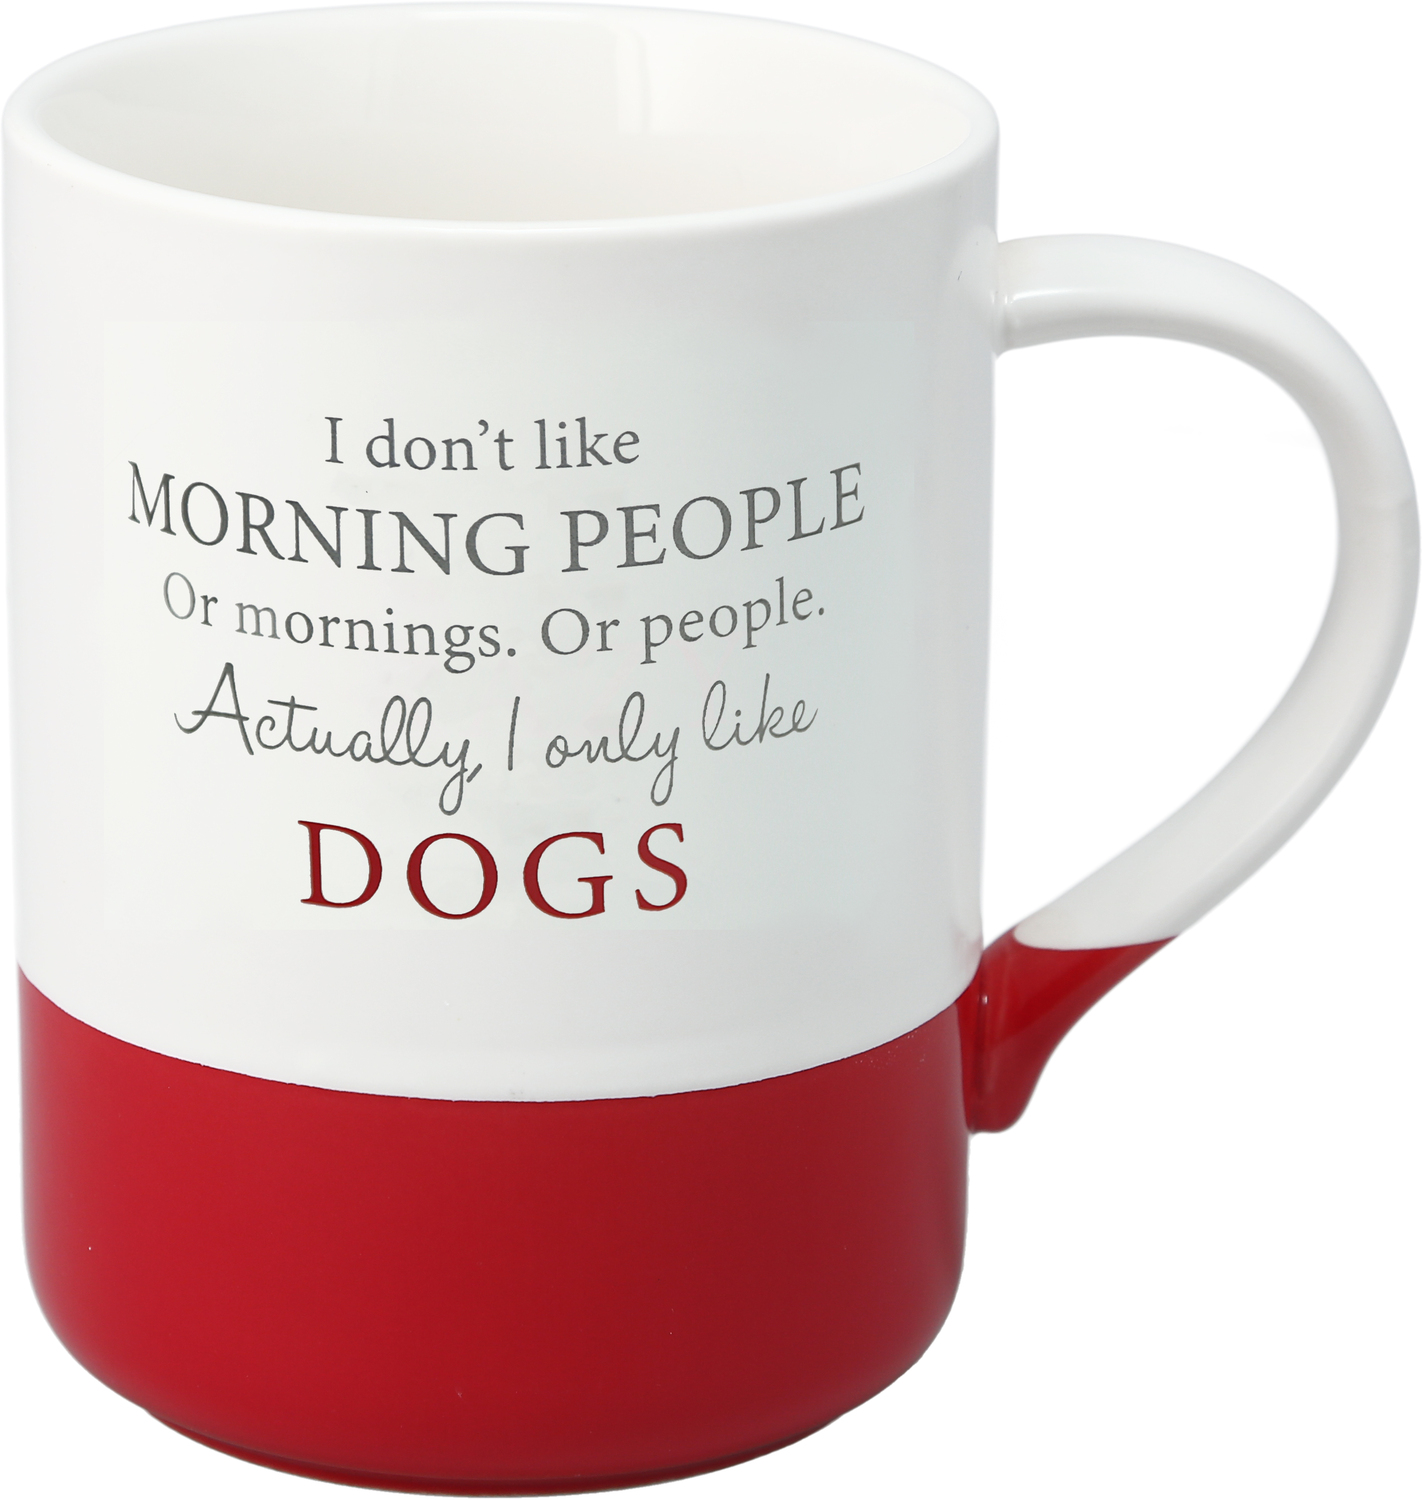 Only Like Dogs by A-Parent-ly - Only Like Dogs - 18 oz Mug